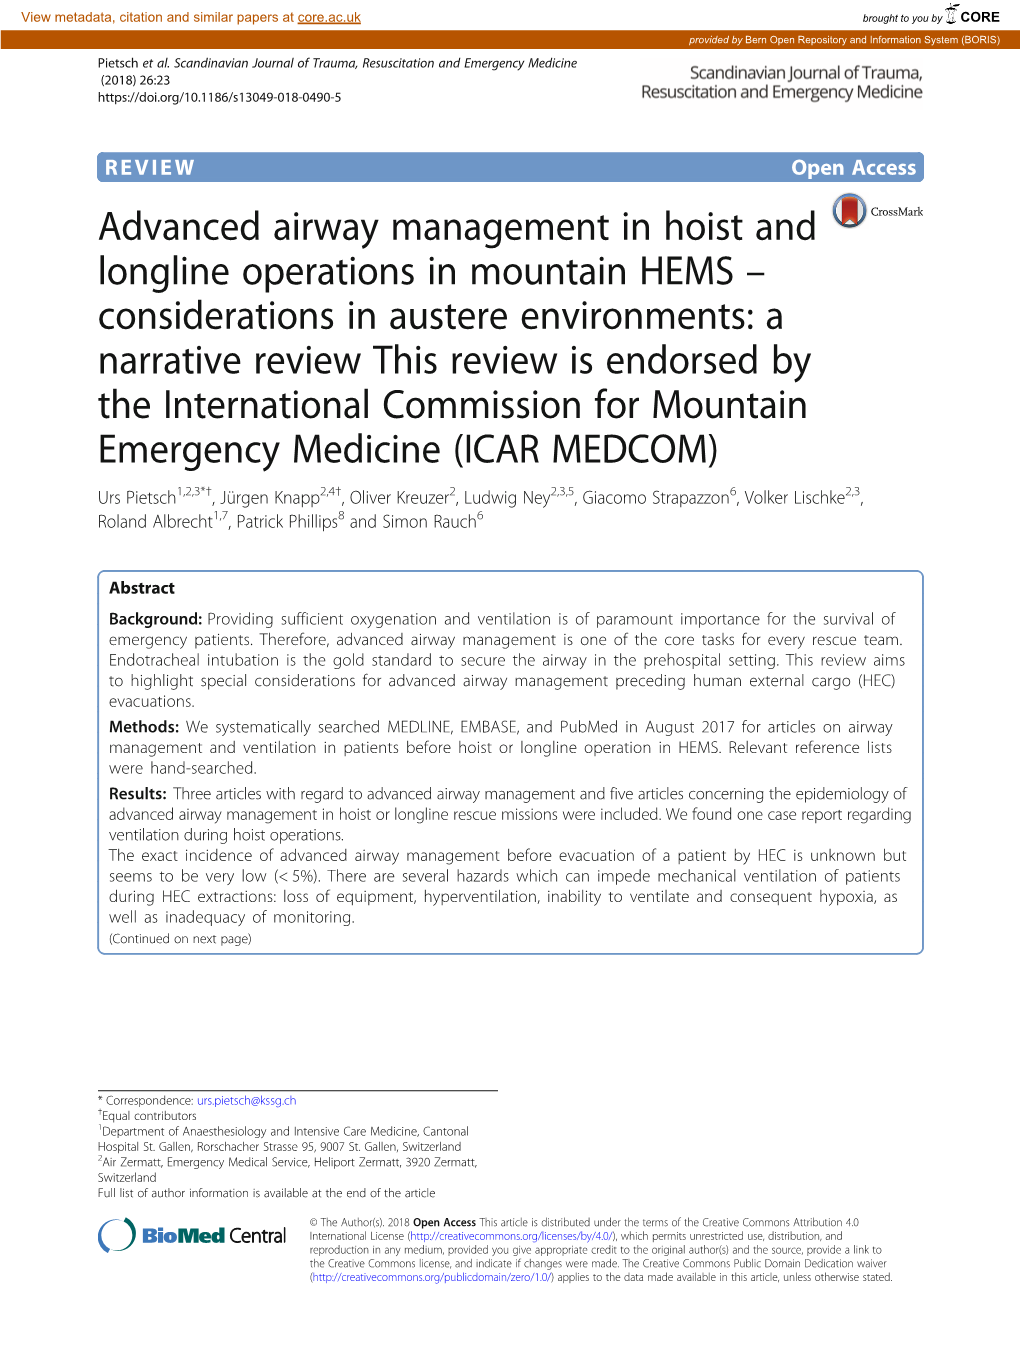 Advanced Airway Management in Hoist and Longline Operations In